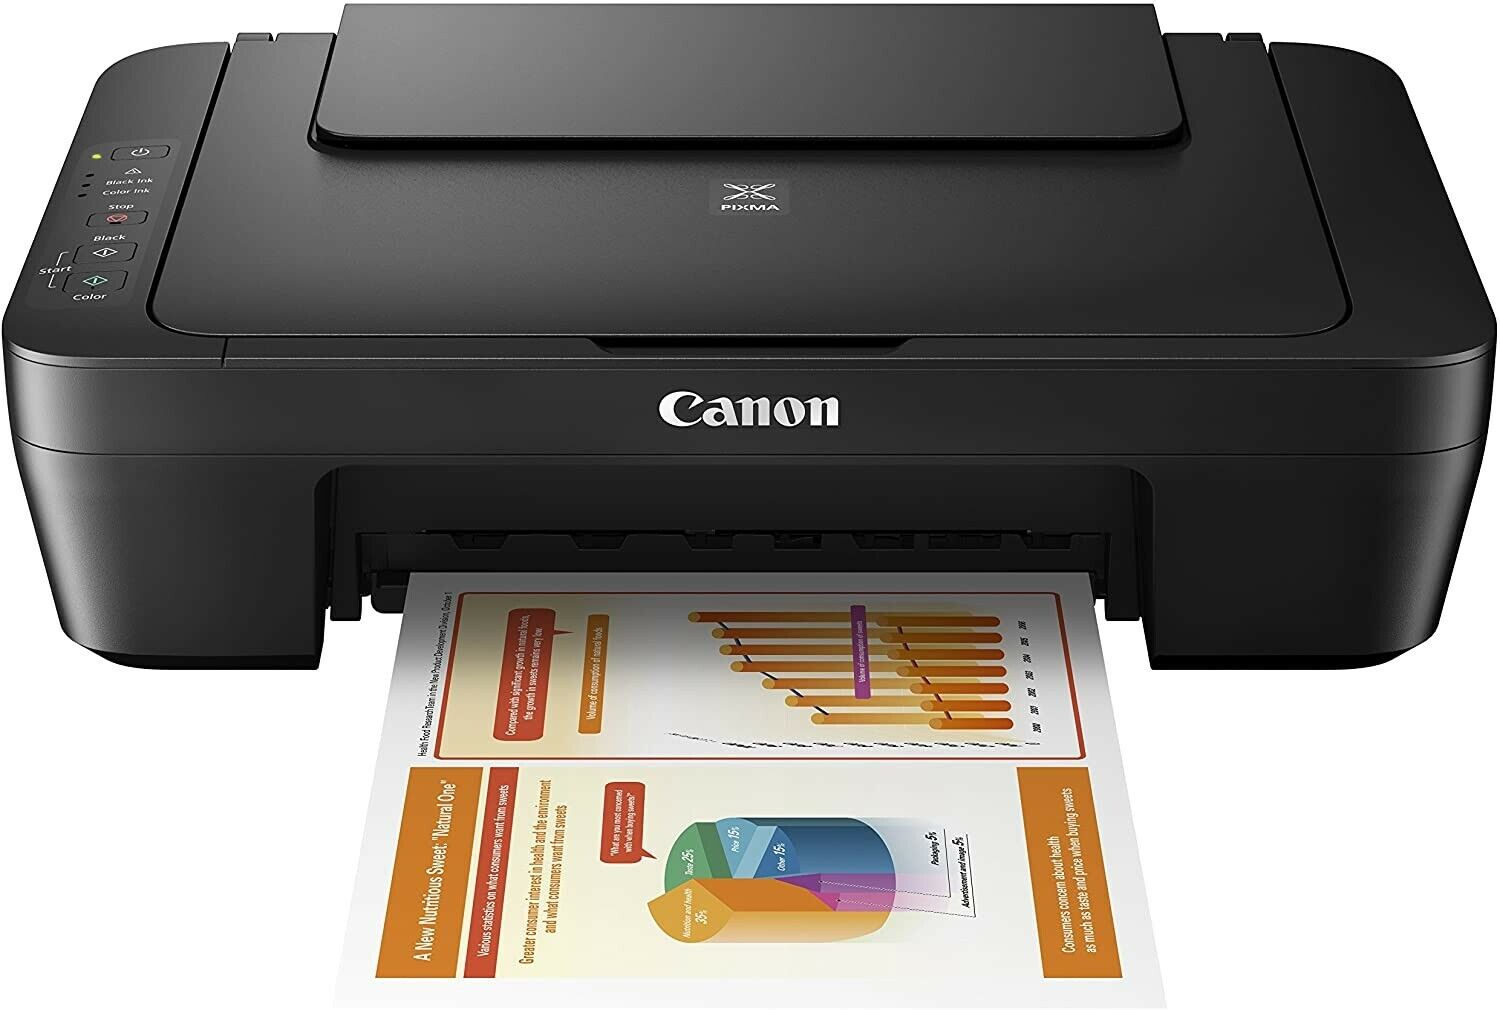 New Canon PIXMA MG2525 All-in-One Wired Inkjet Printer, Scanner, Copier Black. Available Now for 124.99